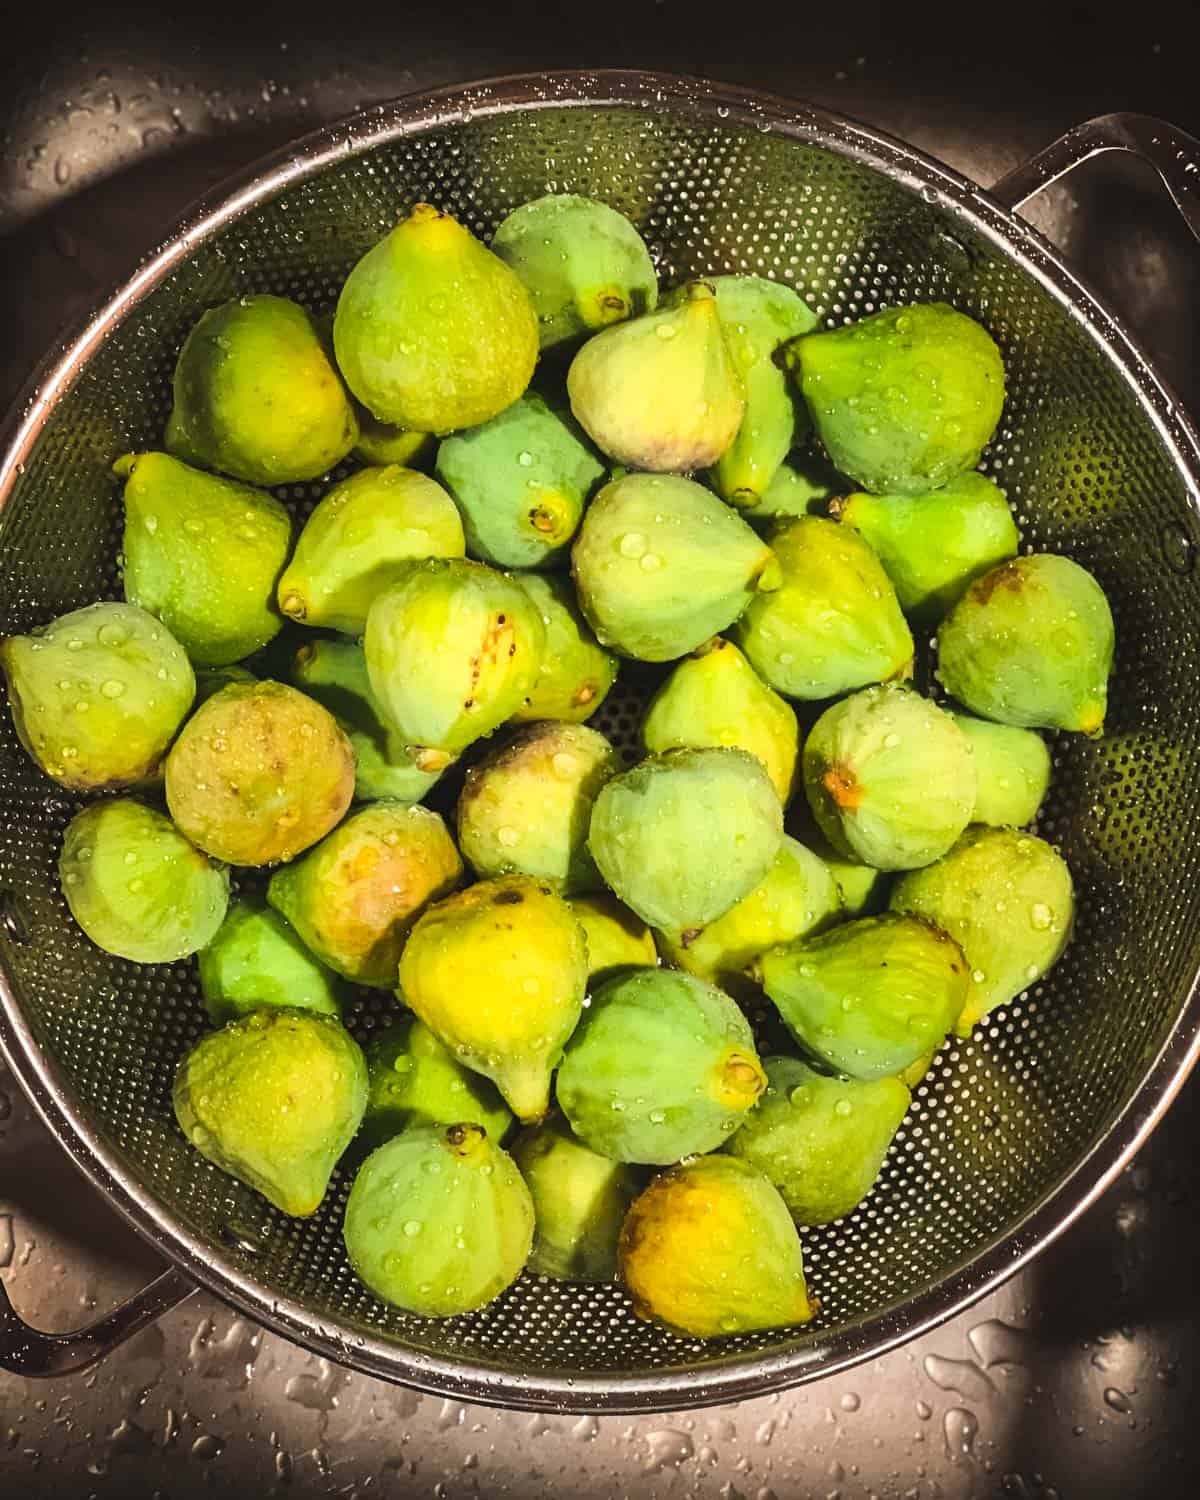 green figs being washed in a sink